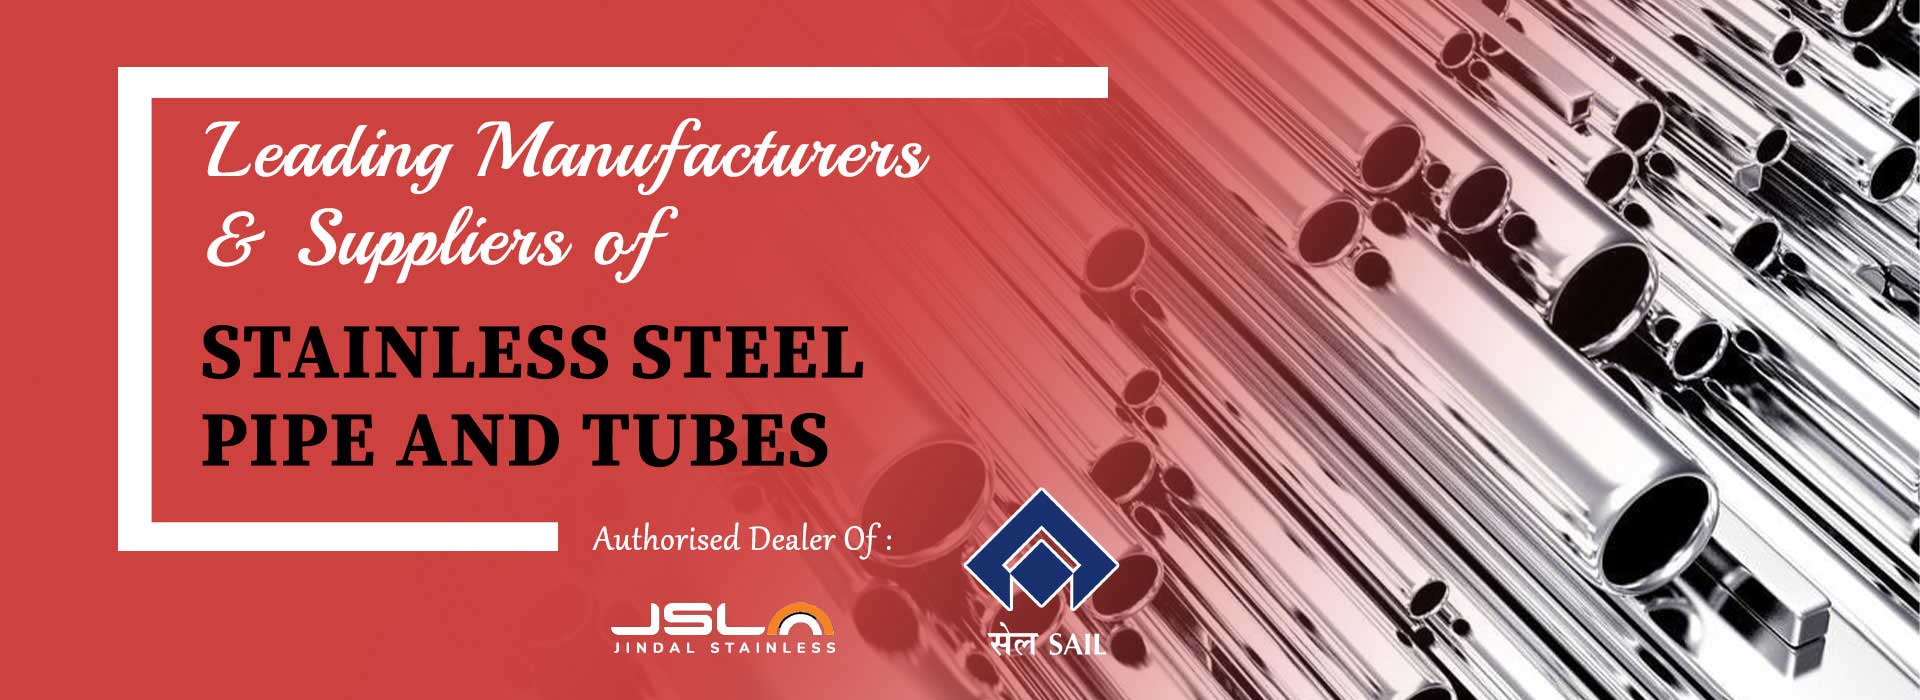 Stainless Steel Pipe and Tubes Manufacturers in Ankleshwar